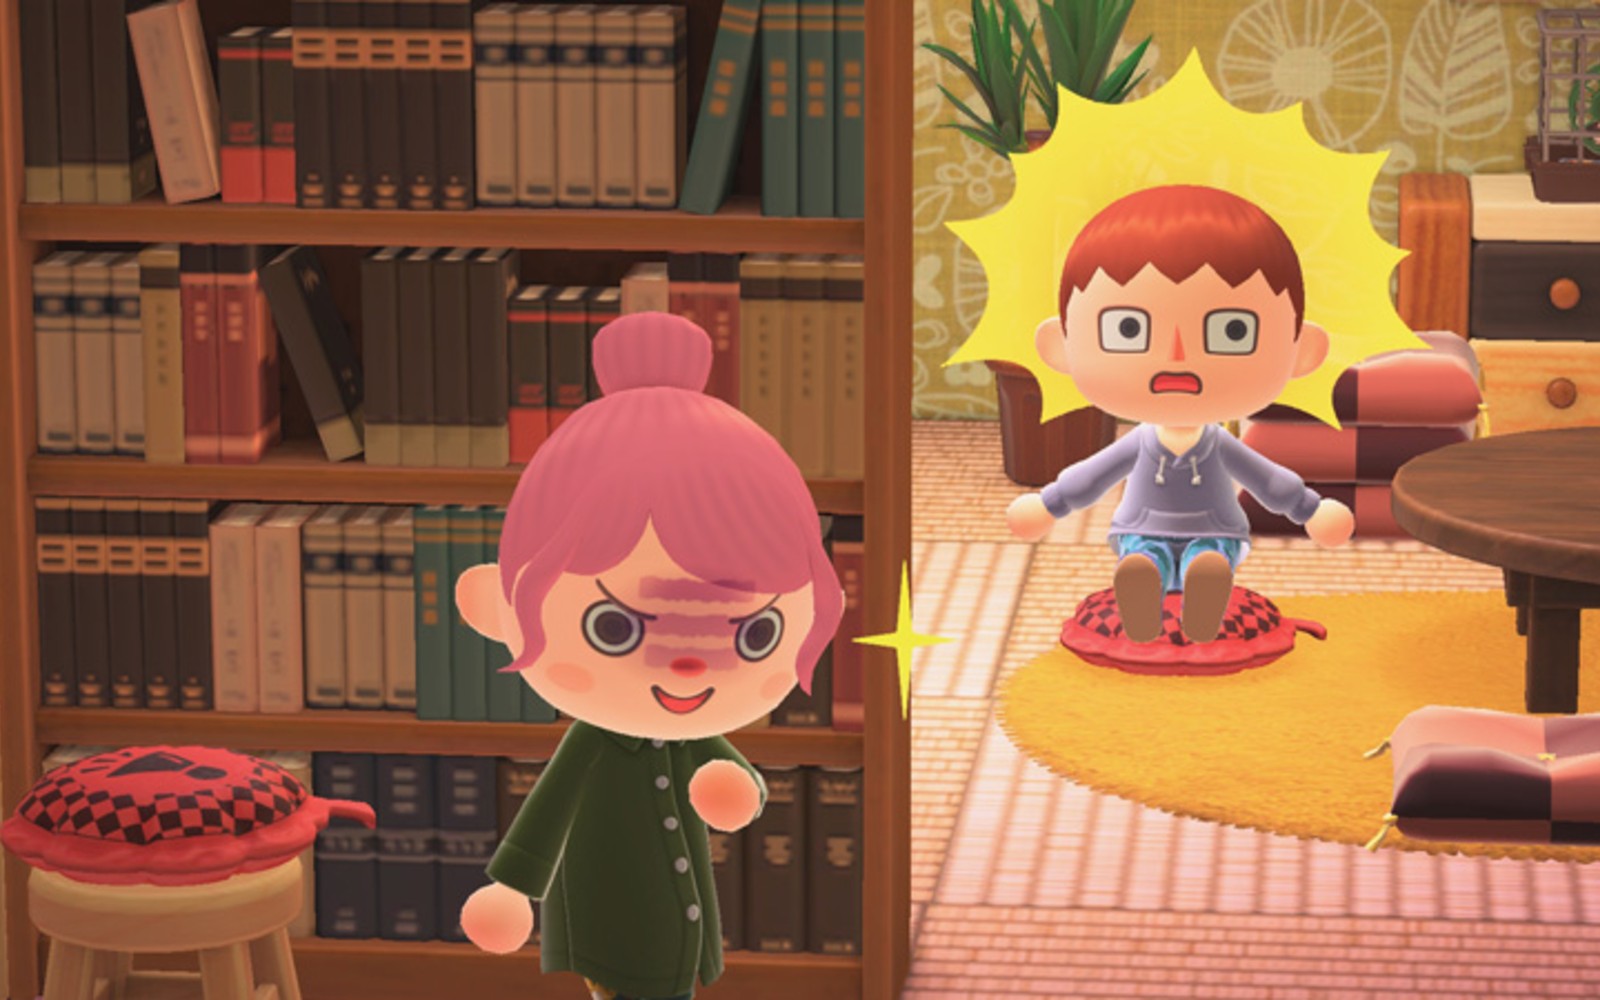 Animal Crossing adds a whoopie pillow in time for April Fool’s Day